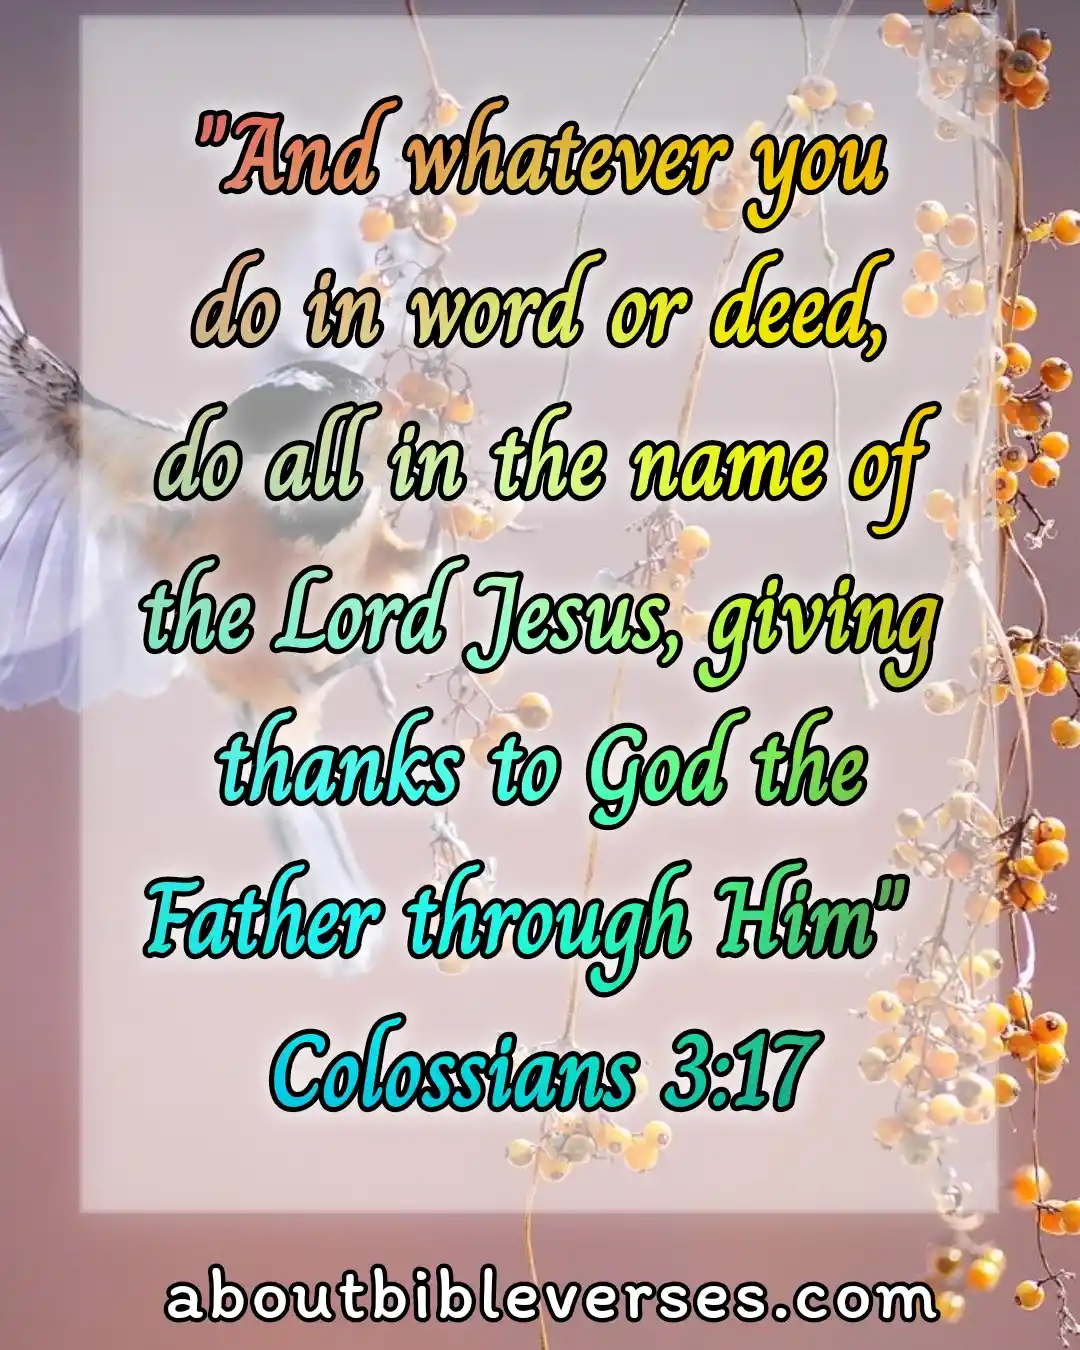 today bible verse (Colossians 3:17)